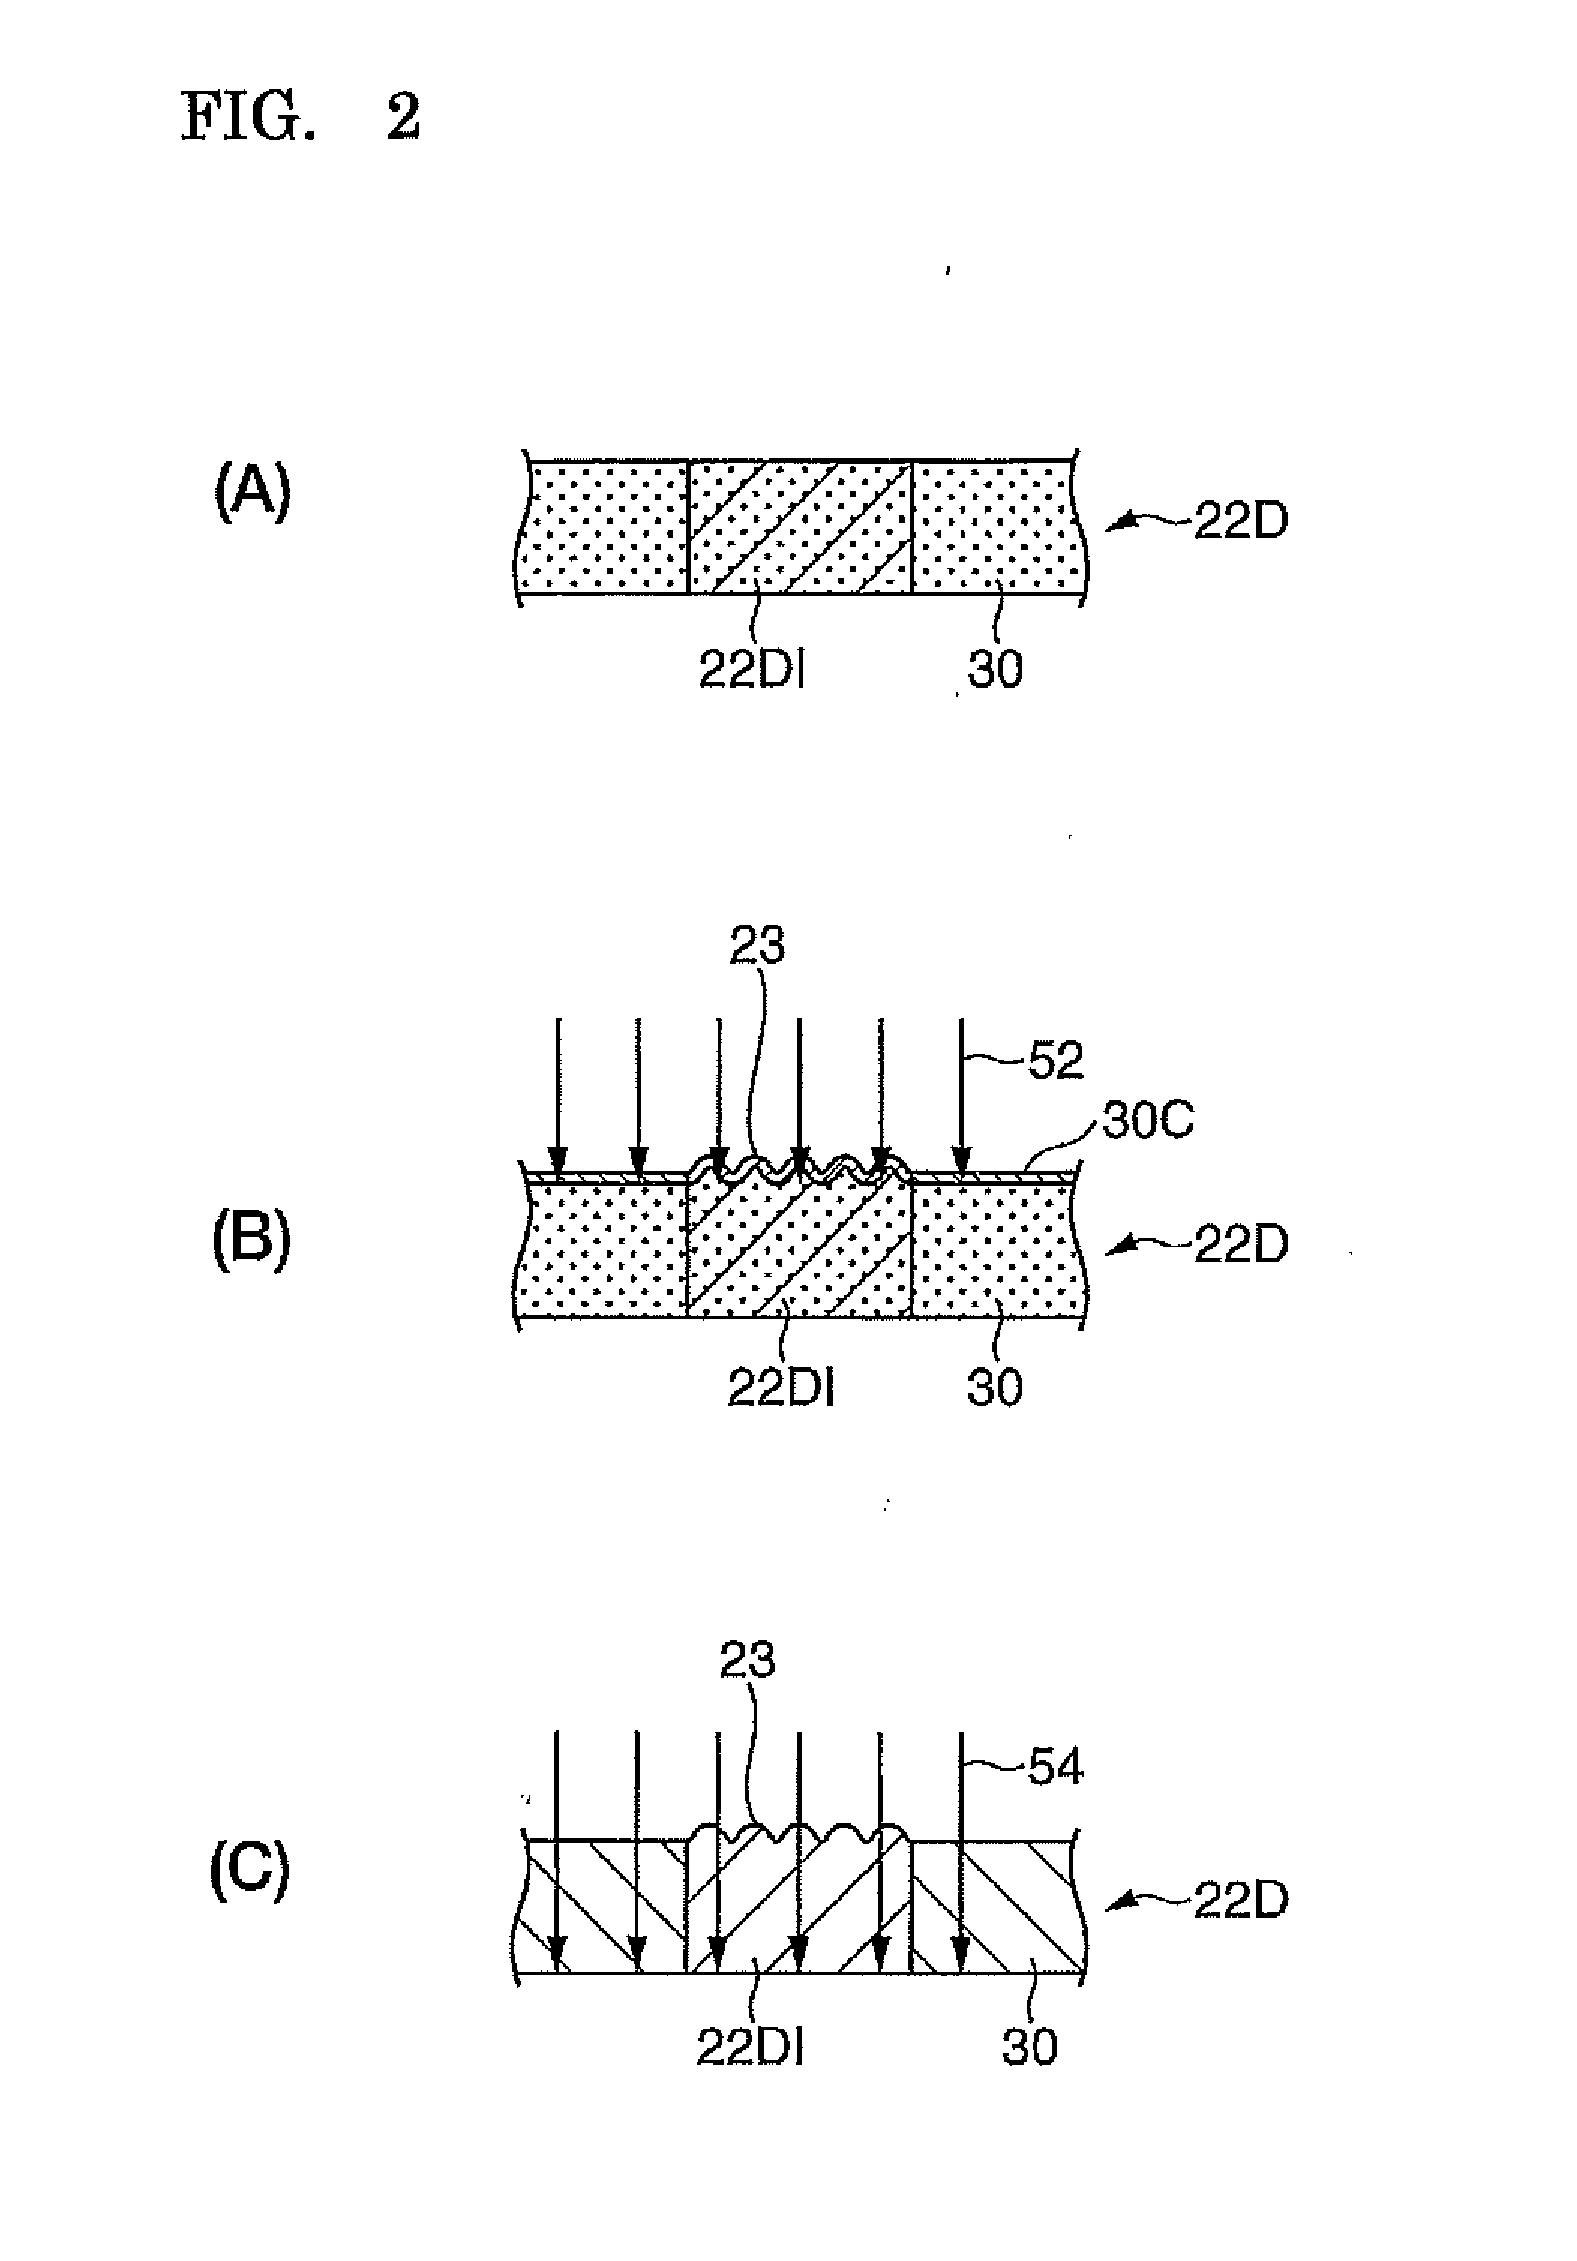 Method and product of hydraulic transfer